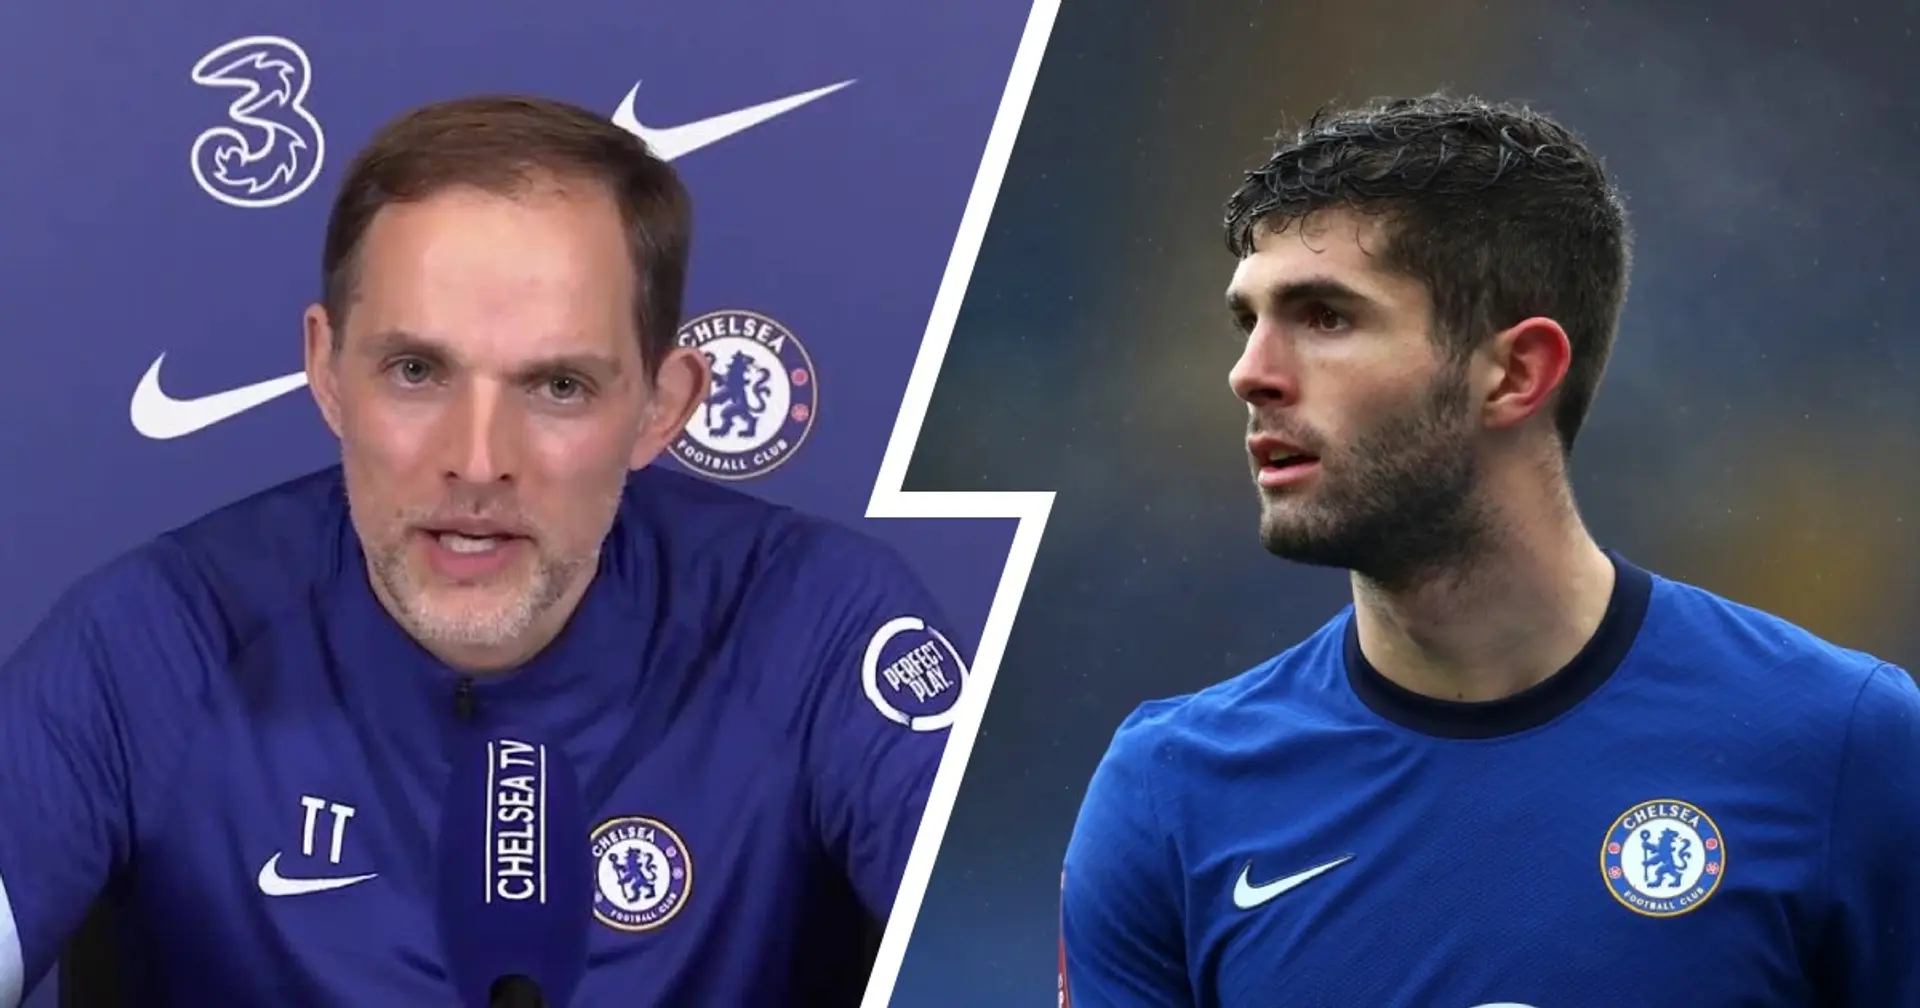 'When you sign for Chelsea, you're expected to be patient': Tuchel opens up Pulisic's lack of game time 